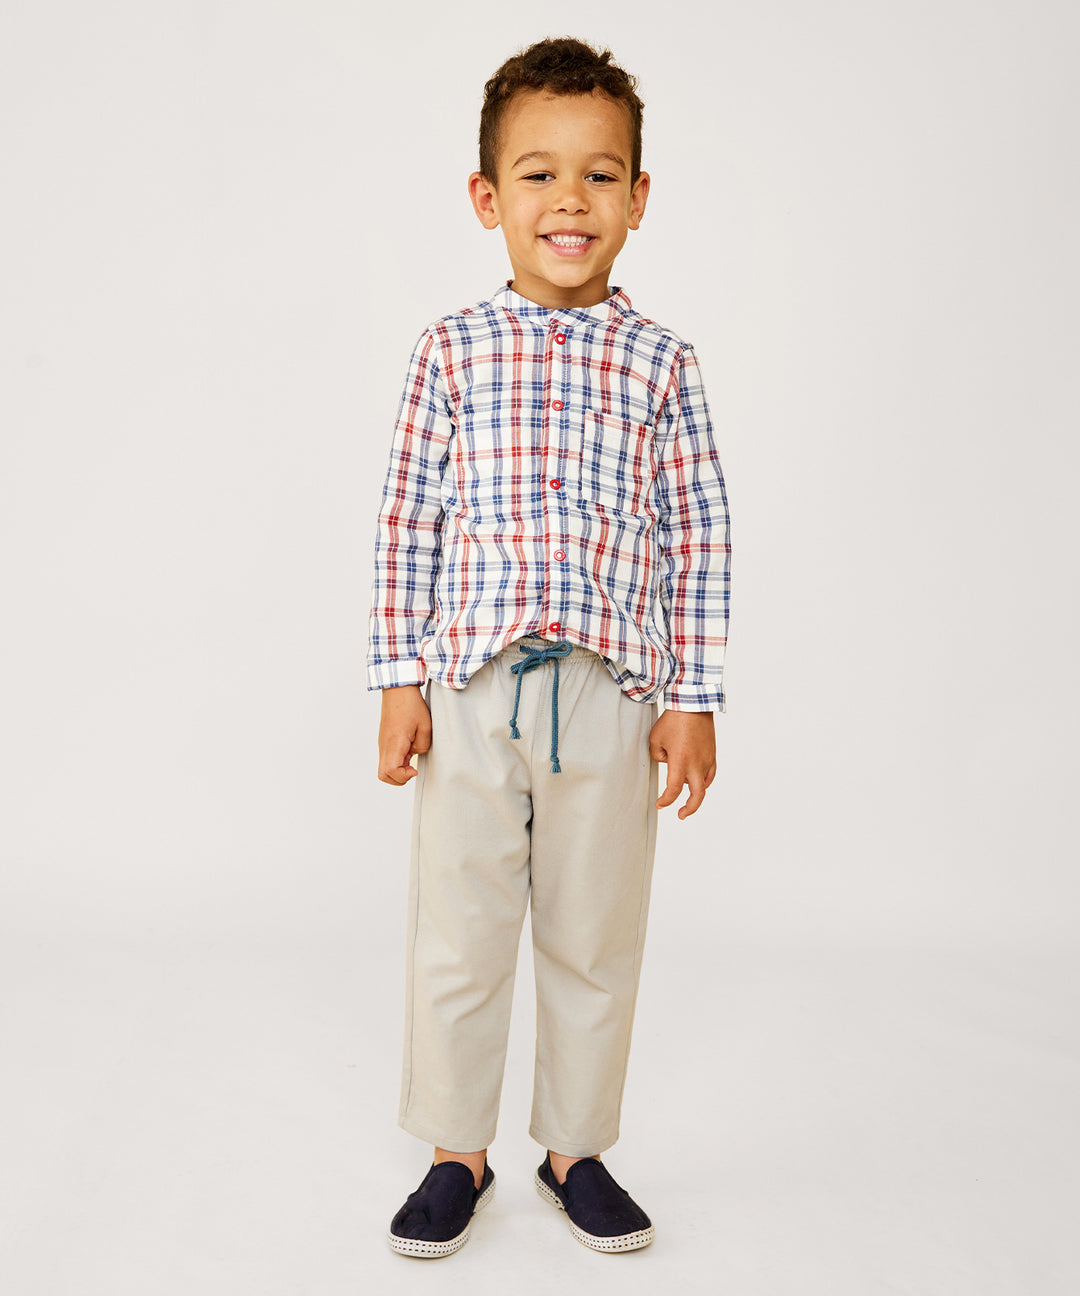 Child New Arrivals – Oso & Me